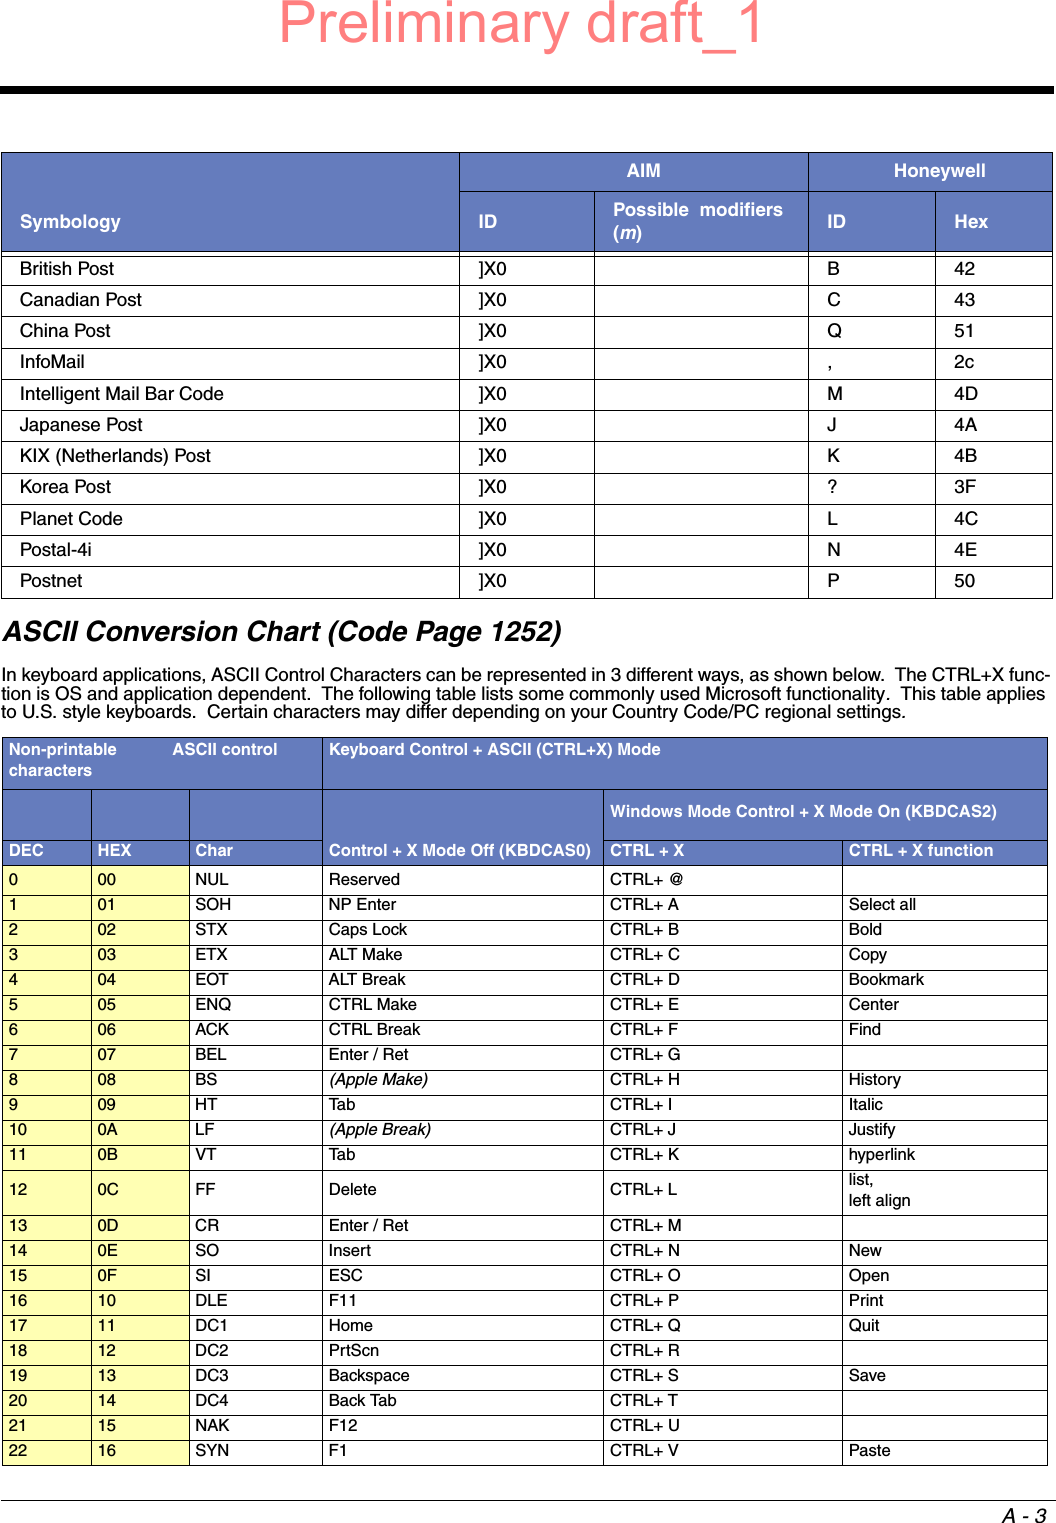 A - 3ASCII Conversion Chart (Code Page 1252)In keyboard applications, ASCII Control Characters can be represented in 3 different ways, as shown below.  The CTRL+X func-tion is OS and application dependent.  The following table lists some commonly used Microsoft functionality.  This table applies to U.S. style keyboards.  Certain characters may differ depending on your Country Code/PC regional settings. British Post ]X0 B 42Canadian Post ]X0 C 43China Post ]X0 Q 51InfoMail ]X0 , 2cIntelligent Mail Bar Code  ]X0 M 4DJapanese Post ]X0 J 4AKIX (Netherlands) Post ]X0 K 4BKorea Post ]X0 ? 3FPlanet Code ]X0 L 4CPostal-4i ]X0 N 4EPostnet ]X0 P 50Non-printable            ASCII control charactersKeyboard Control + ASCII (CTRL+X) Mode Control + X Mode Off (KBDCAS0)Windows Mode Control + X Mode On (KBDCAS2)DEC HEX Char CTRL + X CTRL + X function000 NUL Reserved CTRL+ @  101 SOH NP Enter CTRL+ A Select all202 STX Caps Lock CTRL+ B Bold303 ETX ALT Make CTRL+ C Copy404 EOT ALT Break CTRL+ D Bookmark505 ENQ CTRL Make CTRL+ E Center606 ACK CTRL Break CTRL+ F Find707 BEL Enter / Ret CTRL+ G  808 BS (Apple Make) CTRL+ H History909 HT Tab CTRL+ I Italic10 0A LF (Apple Break) CTRL+ J Justify11 0B VT Tab CTRL+ K hyperlink12 0C FF Delete CTRL+ L list, left align13 0D CR Enter / Ret CTRL+ M  14 0E SO Insert CTRL+ N New15 0F SI ESC CTRL+ O Open16 10 DLE F11 CTRL+ P Print17 11 DC1 Home CTRL+ Q Quit18 12 DC2 PrtScn CTRL+ R  19 13 DC3 Backspace CTRL+ S Save20 14 DC4 Back Tab CTRL+ T  21 15 NAK F12 CTRL+ U  22 16 SYN F1 CTRL+ V Paste AIM HoneywellSymbology ID Possible  modifiers (m)ID HexPreliminary draft_1